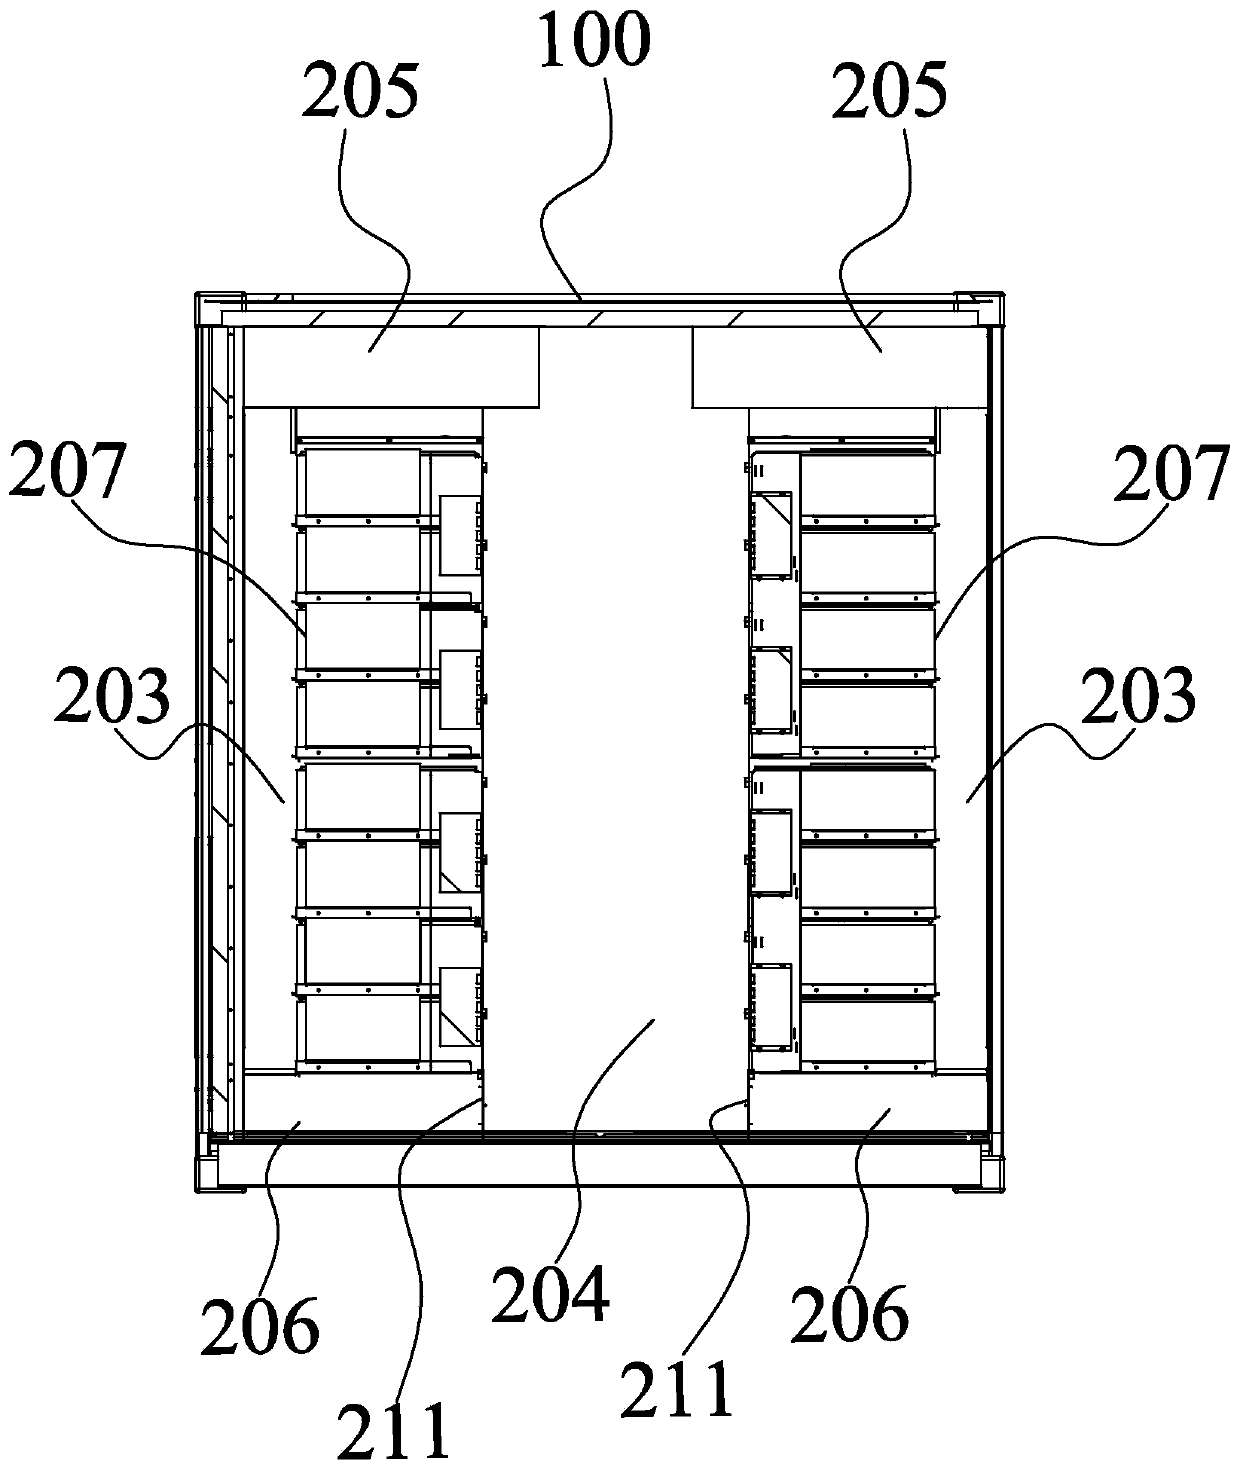 Battery PACK cooling assembly, energy storage container and cooling method